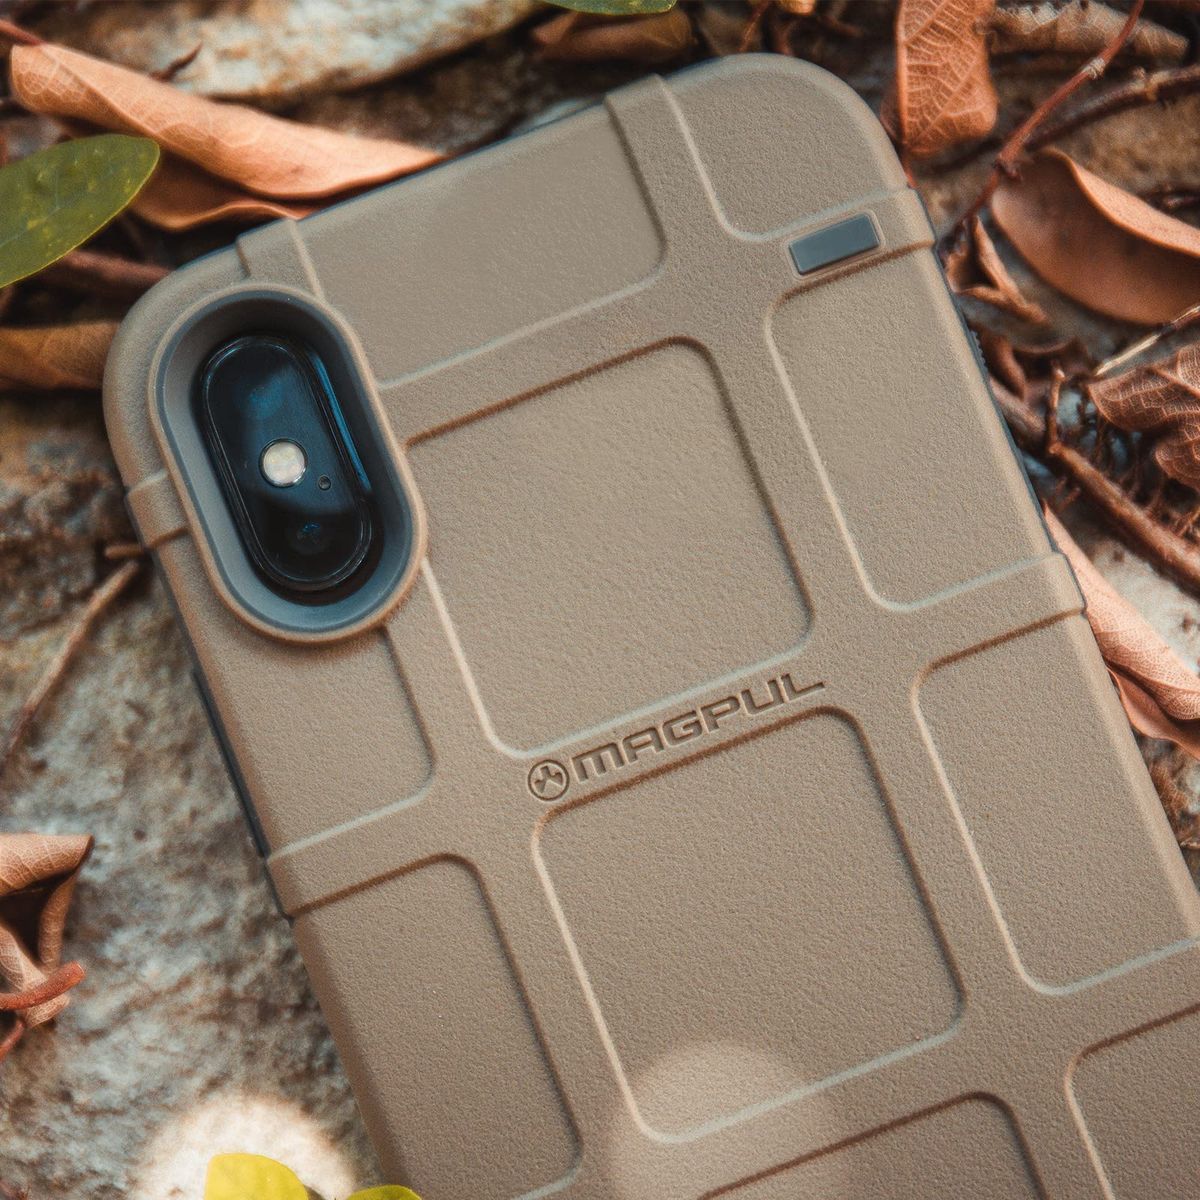 FDE iPhone case by Magpul